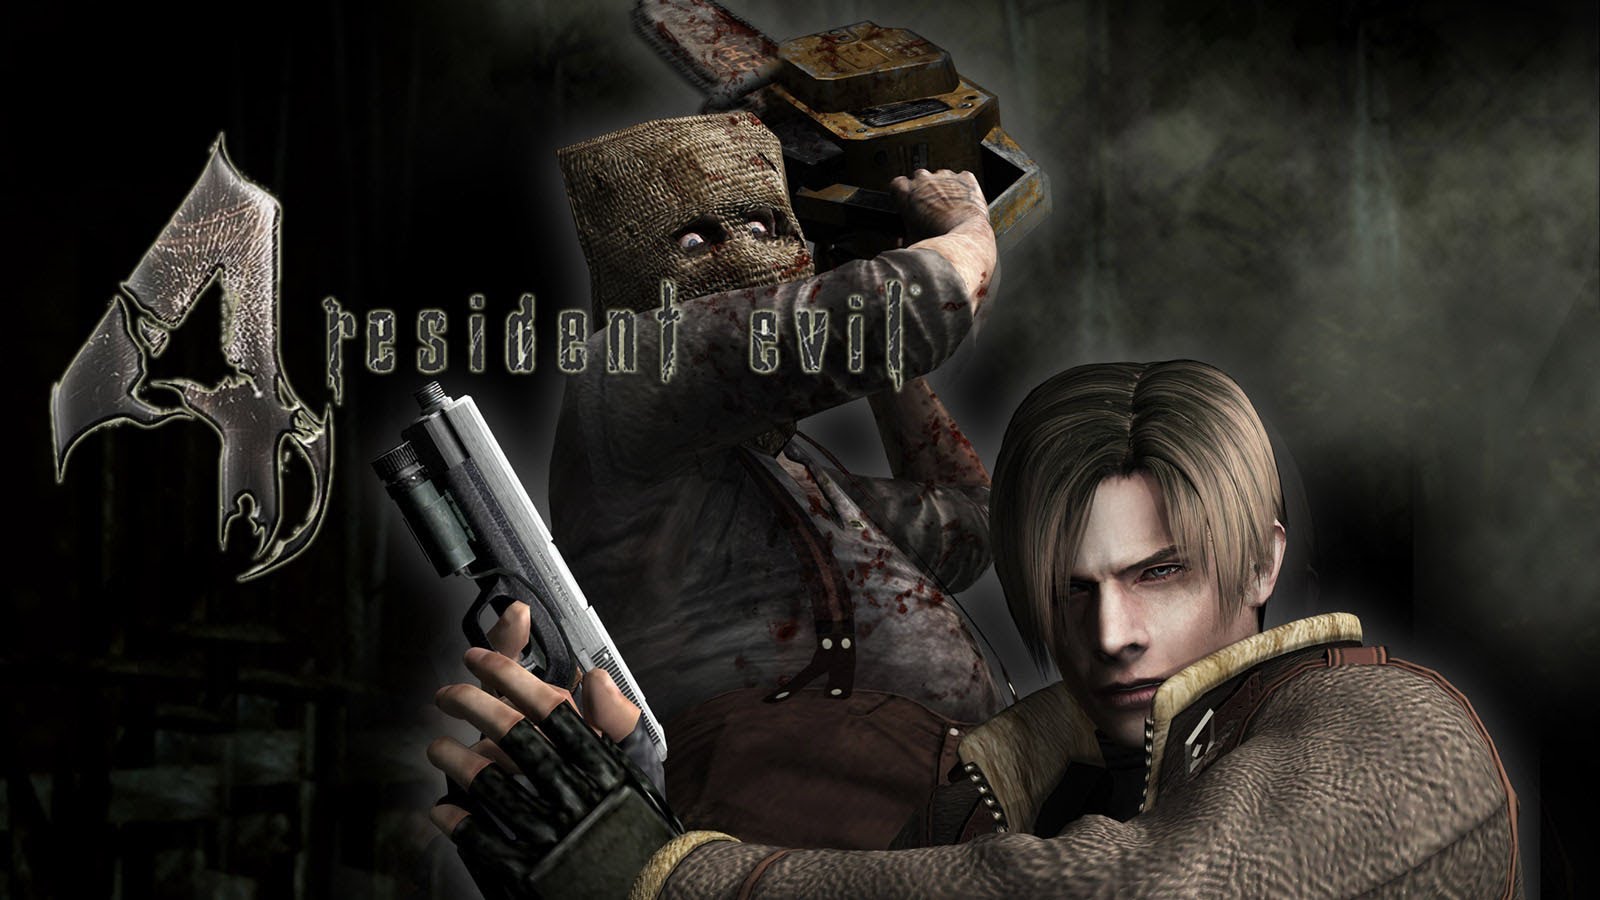 Amazing Resident Evil 4 Pictures & Backgrounds